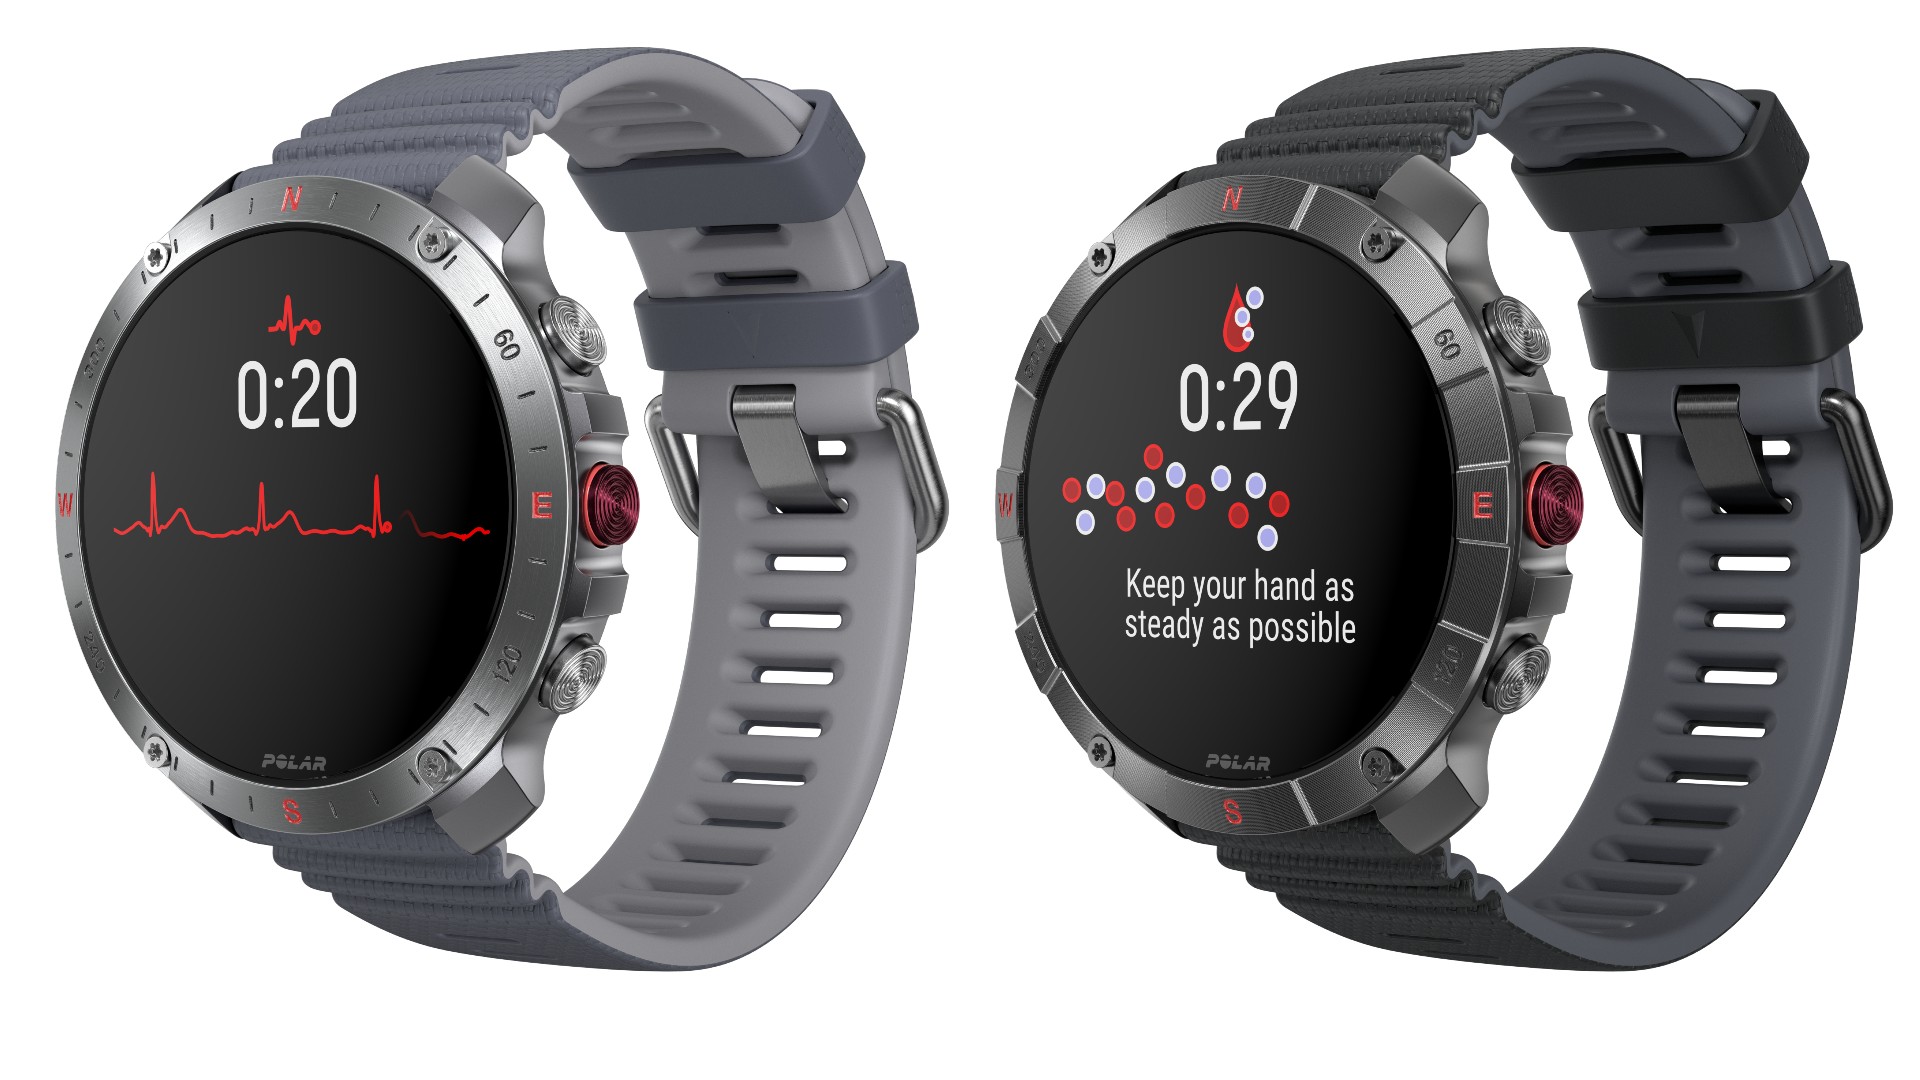 Two Polar Grit X2 Pro watches on white background. One screen shows a red heart beat graph and the time 20 seconds, the other screen shows blue and red circles, a time showing 29 seconds, and the text 